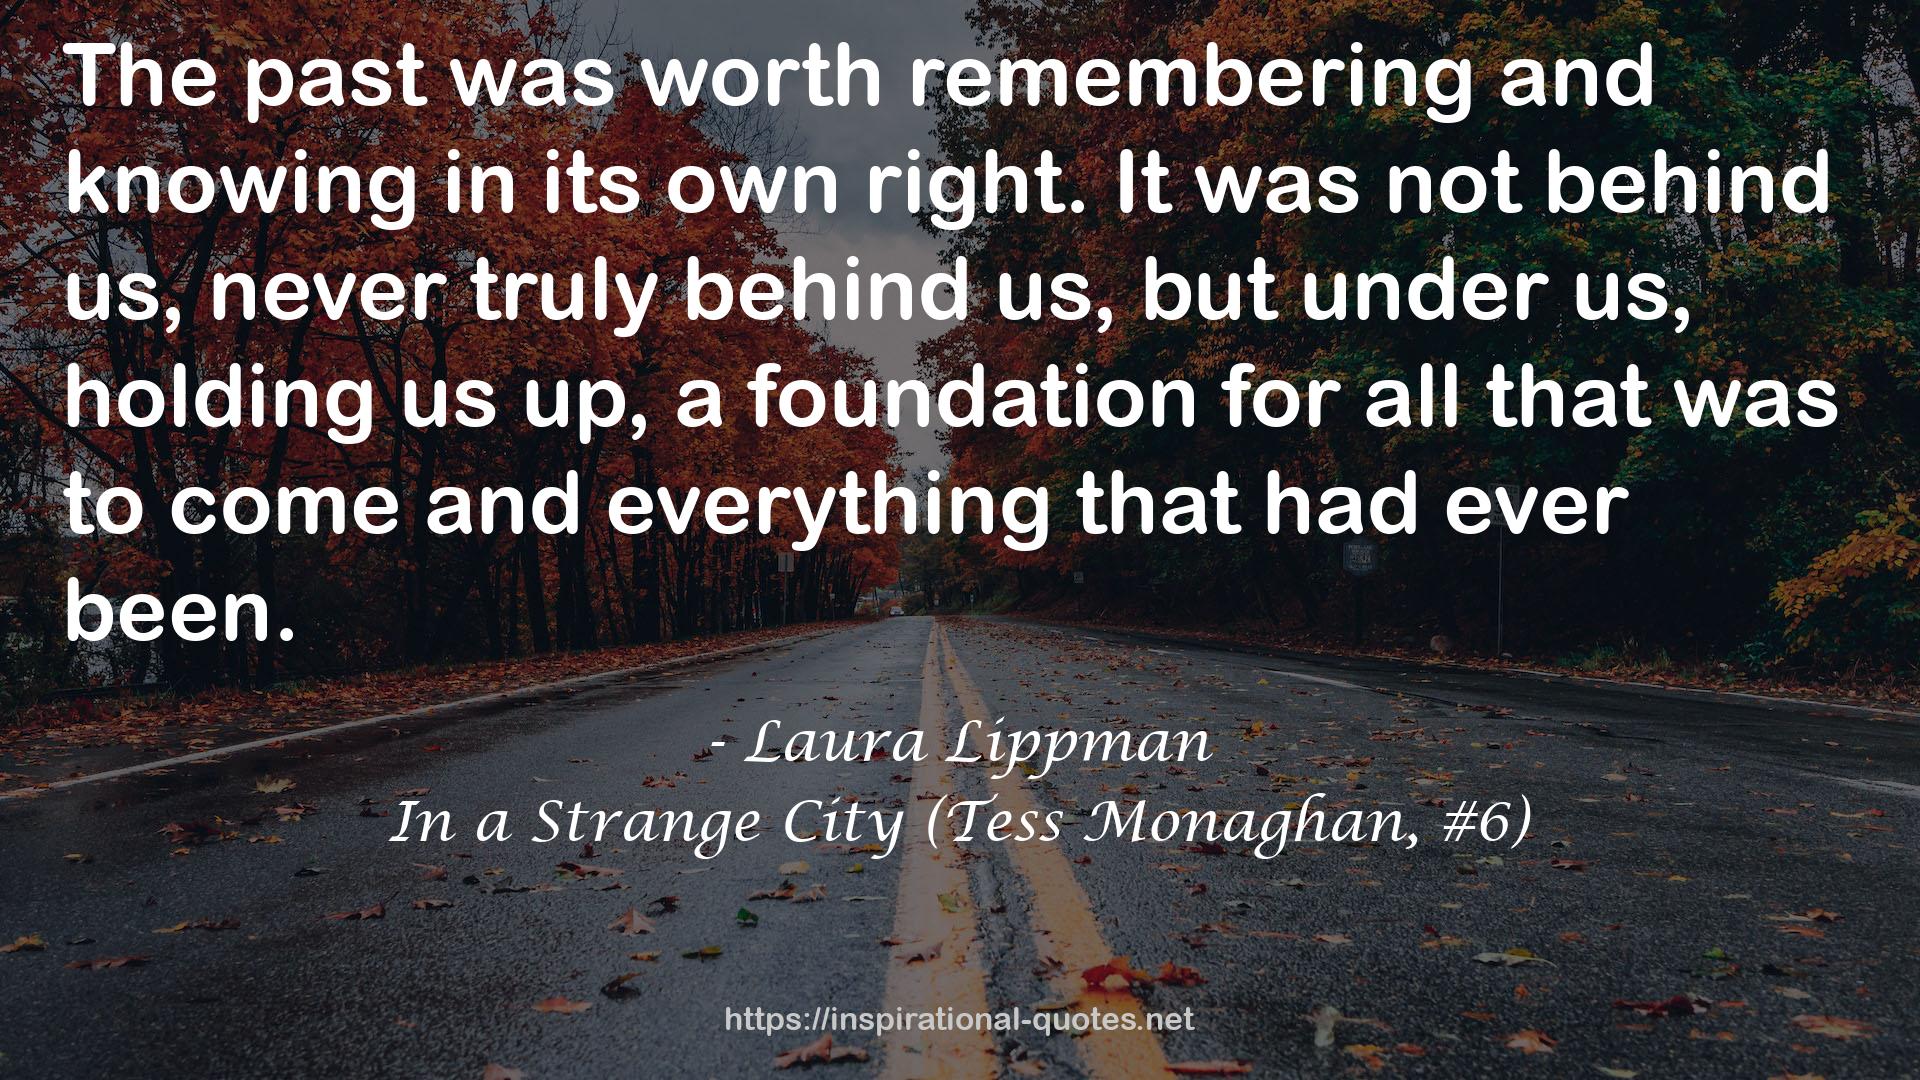 In a Strange City (Tess Monaghan, #6) QUOTES